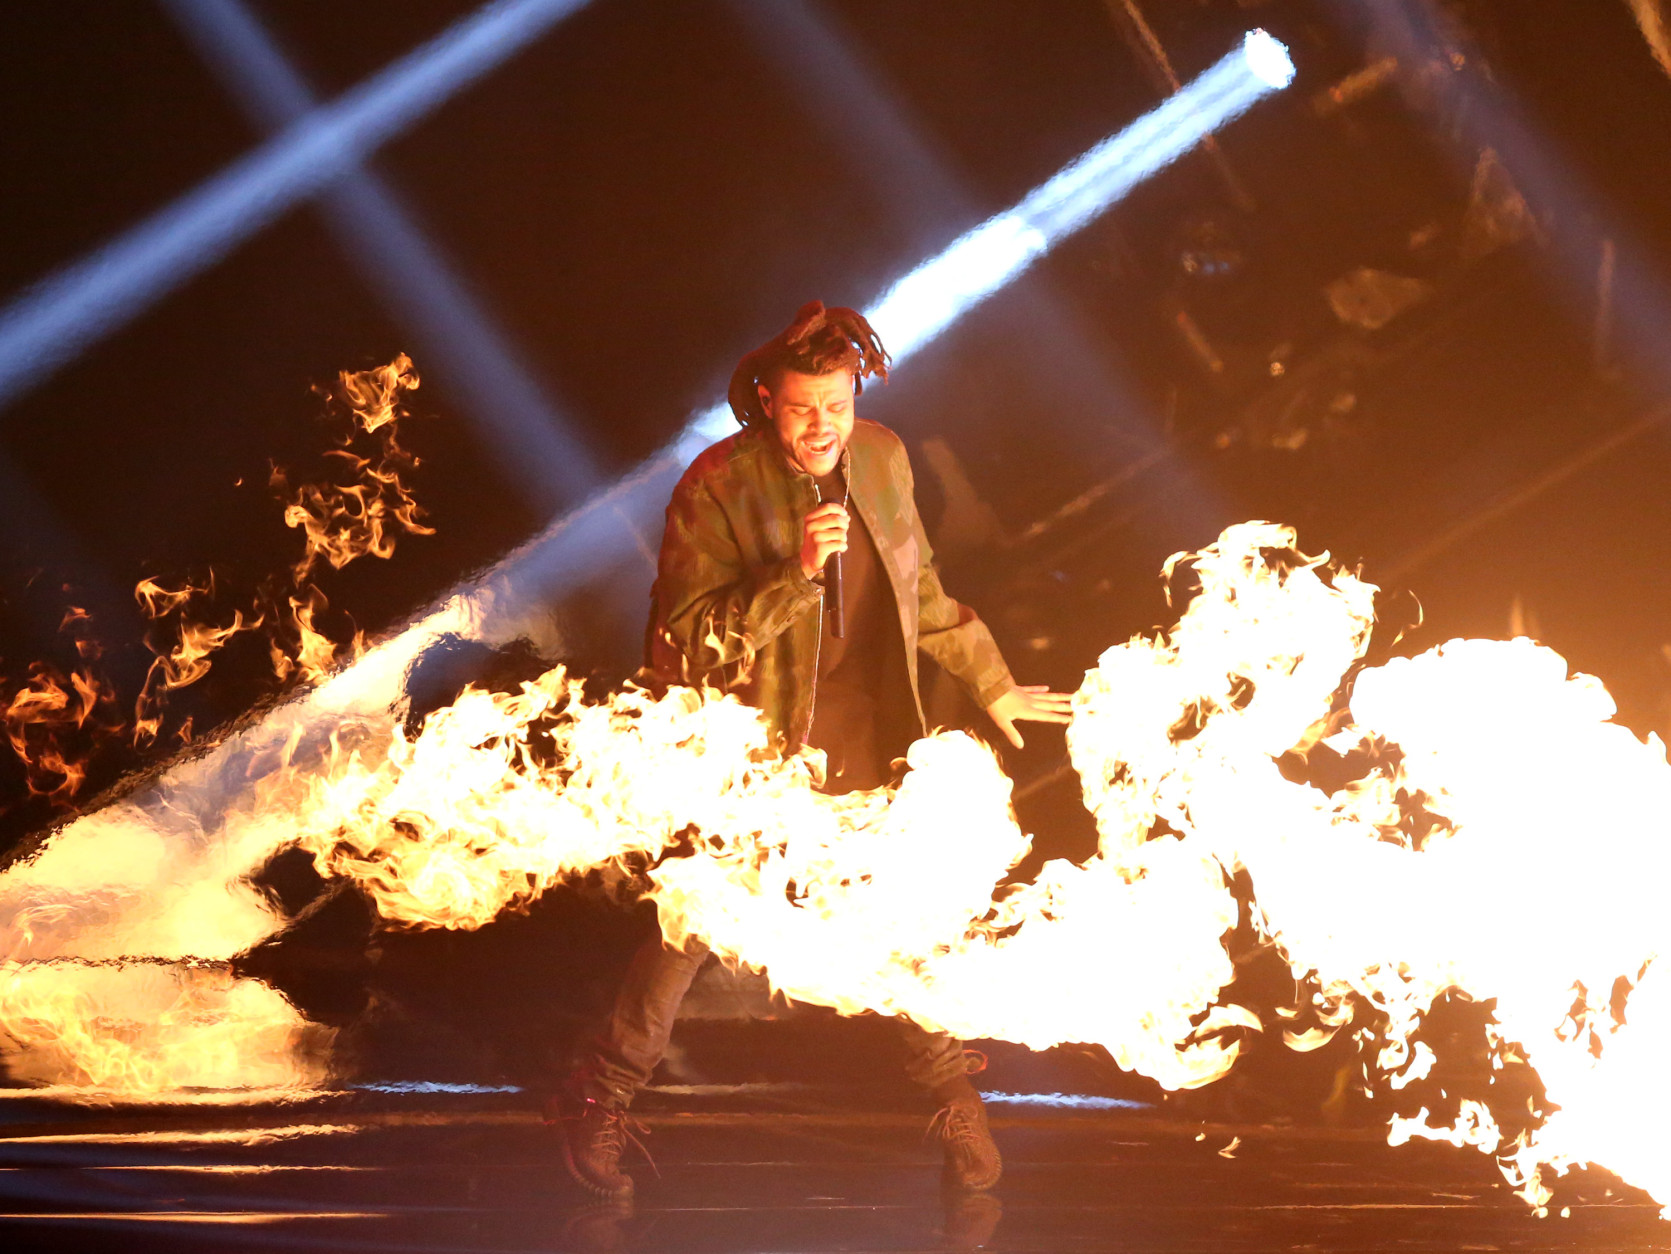 The Weeknd performs at the MTV Video Music Awards at the Microsoft Theater on Sunday, Aug. 30, 2015, in Los Angeles. (Photo by Matt Sayles/Invision/AP)